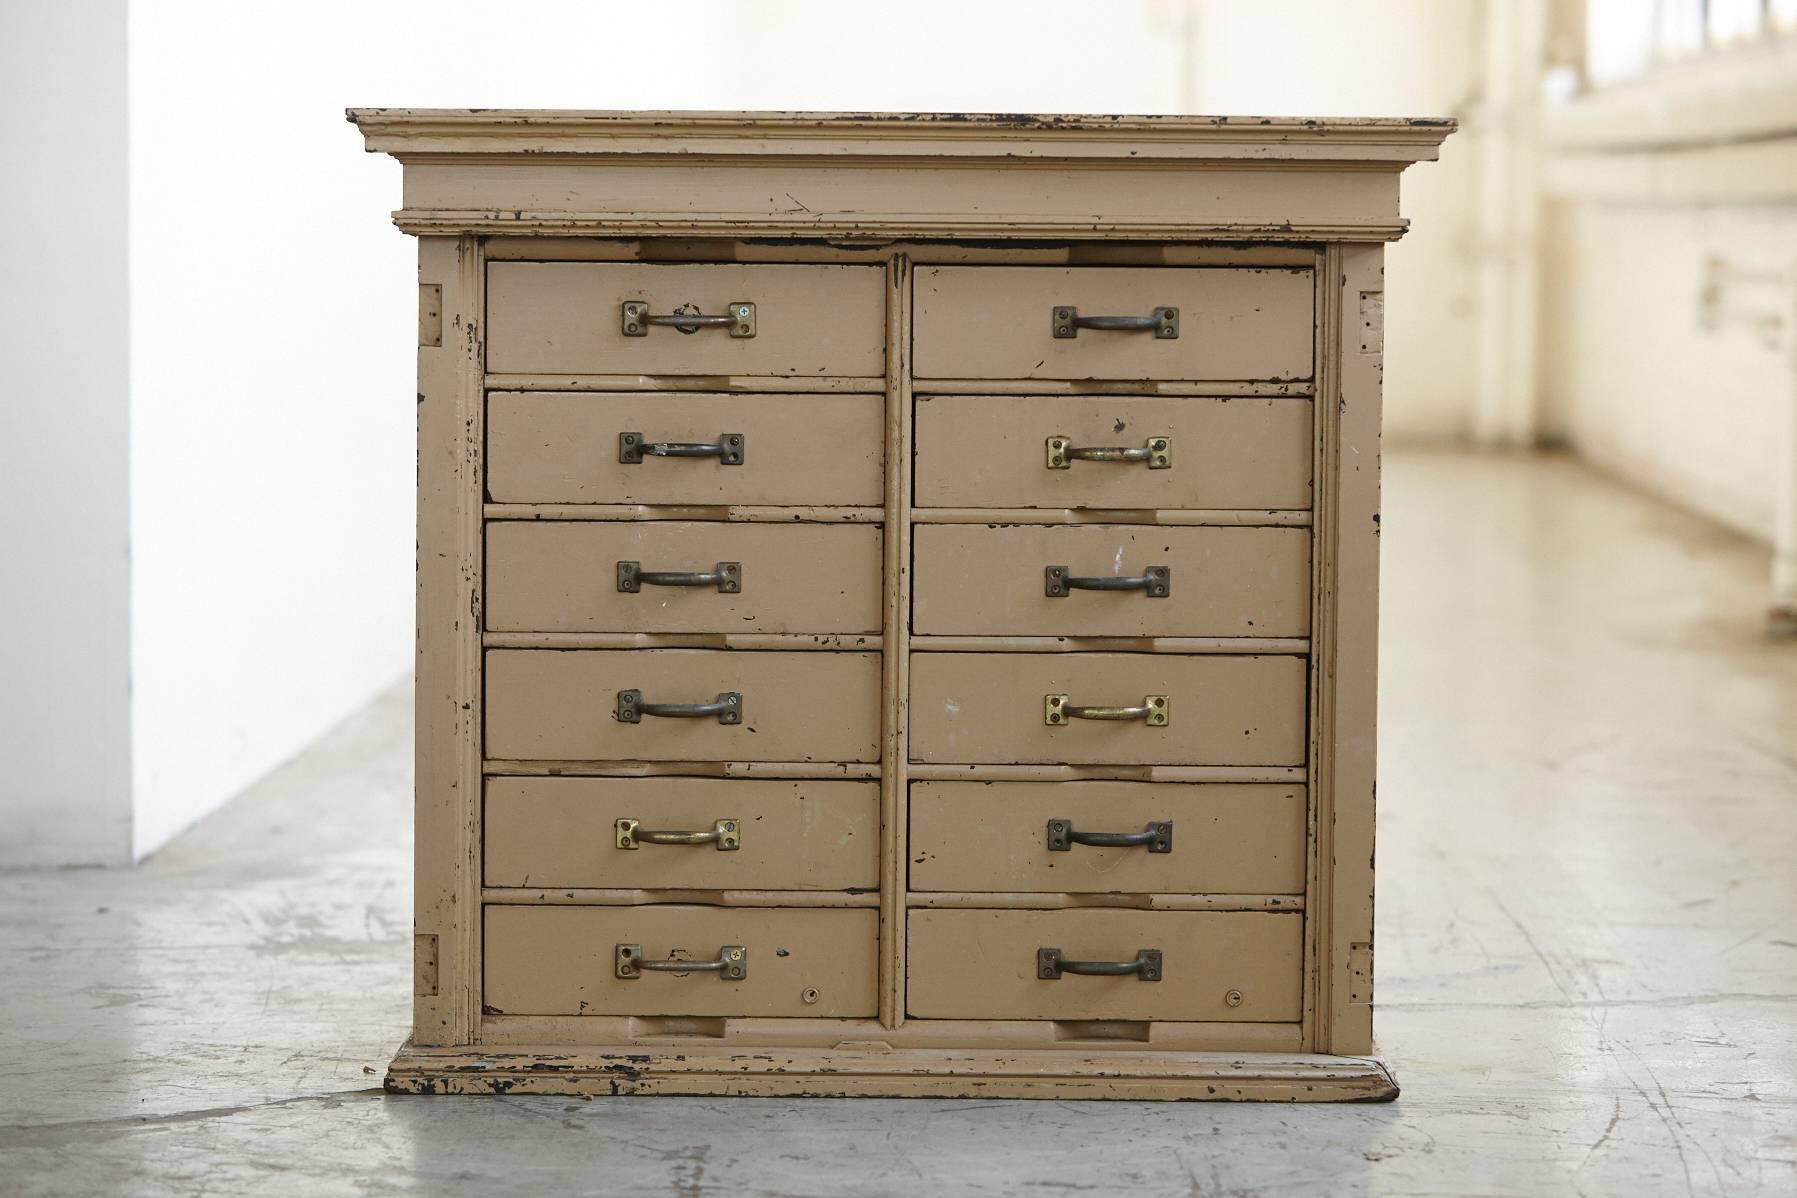 Original paint 12-drawer cabinet with metal pulls. Nice original distressed appearance. Some of the metal pulls have been replaced, all 12 drawers open and close easily.